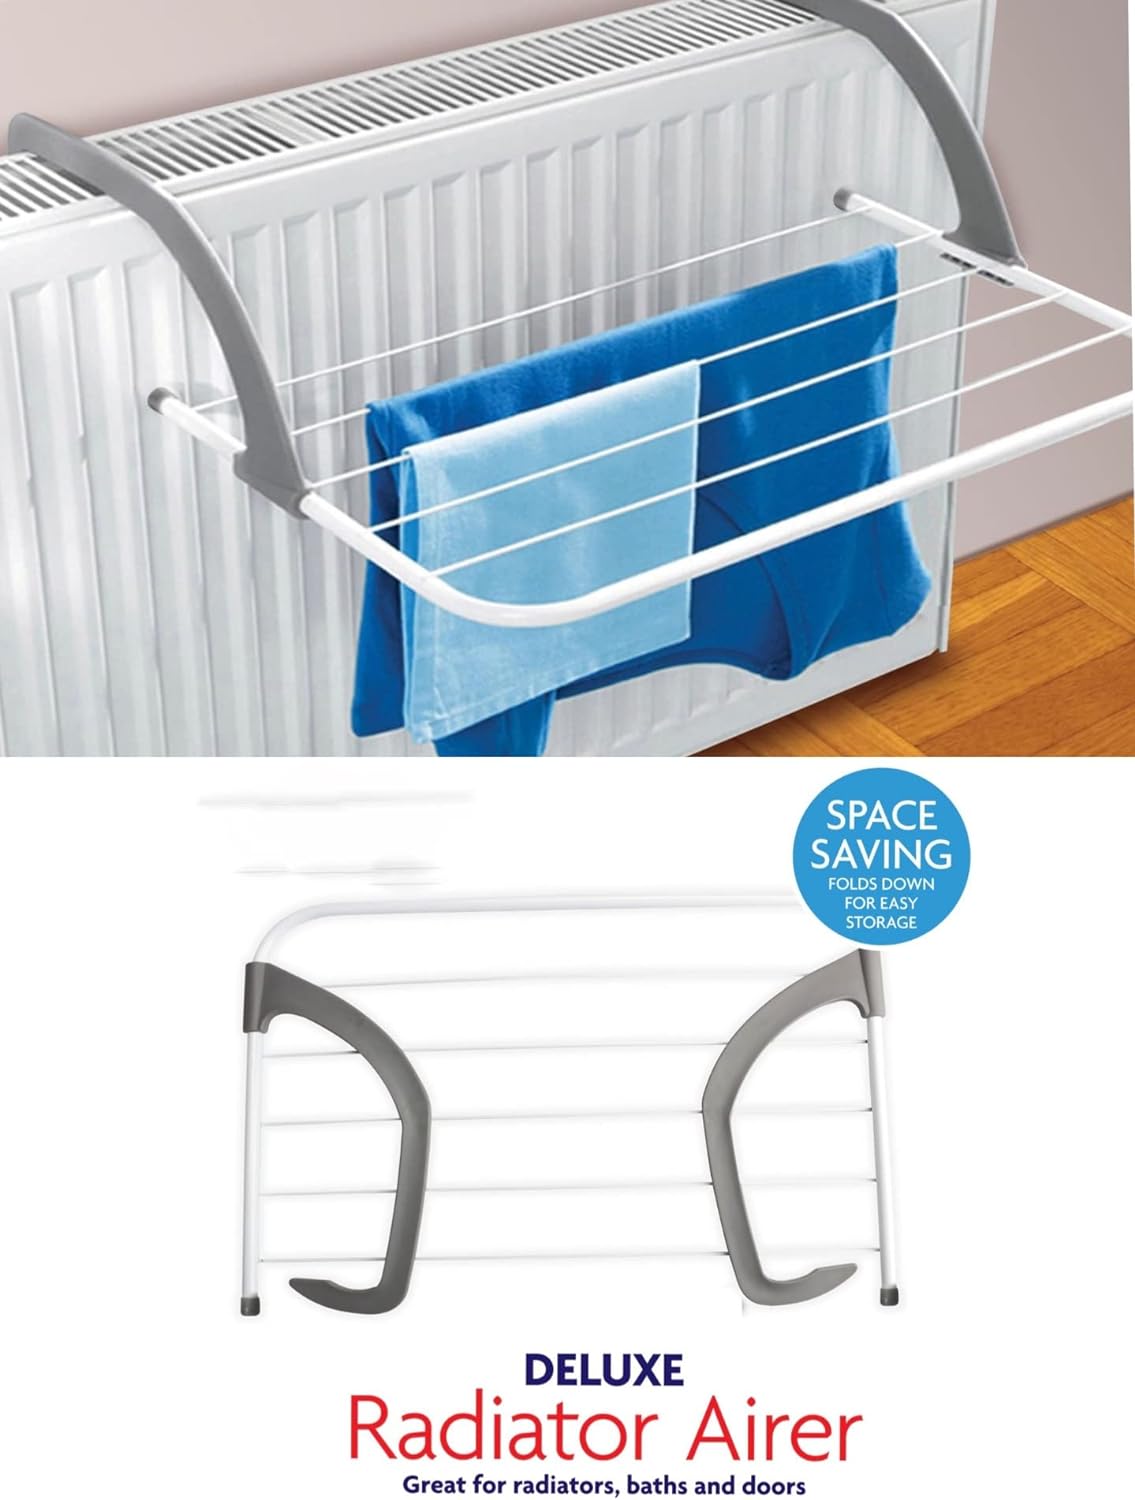 ADEPTNA Folding Radiator Cloth Airer Rack - Clothes Laundry Dryer Portable – Great for Radiators Baths and Doors (2 PACK)ADEPTNA Folding Radiator Cloth Airer Rack - Clothes Laundry Dryer Portable – Great for Radiators Baths and Doors (2 PACK)